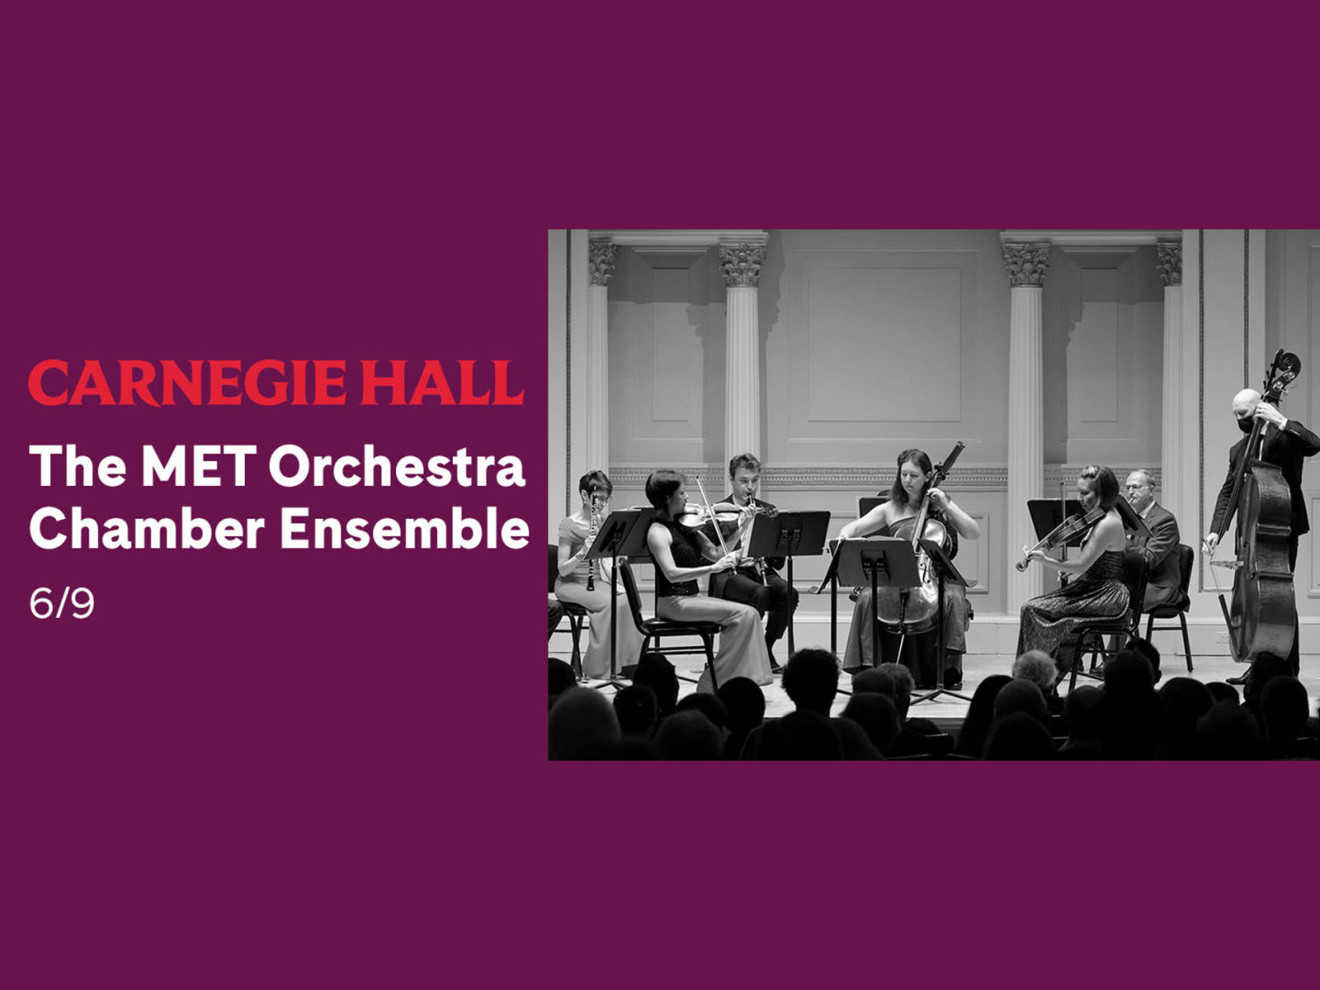 The MET Orchestra Chamber Ensemble